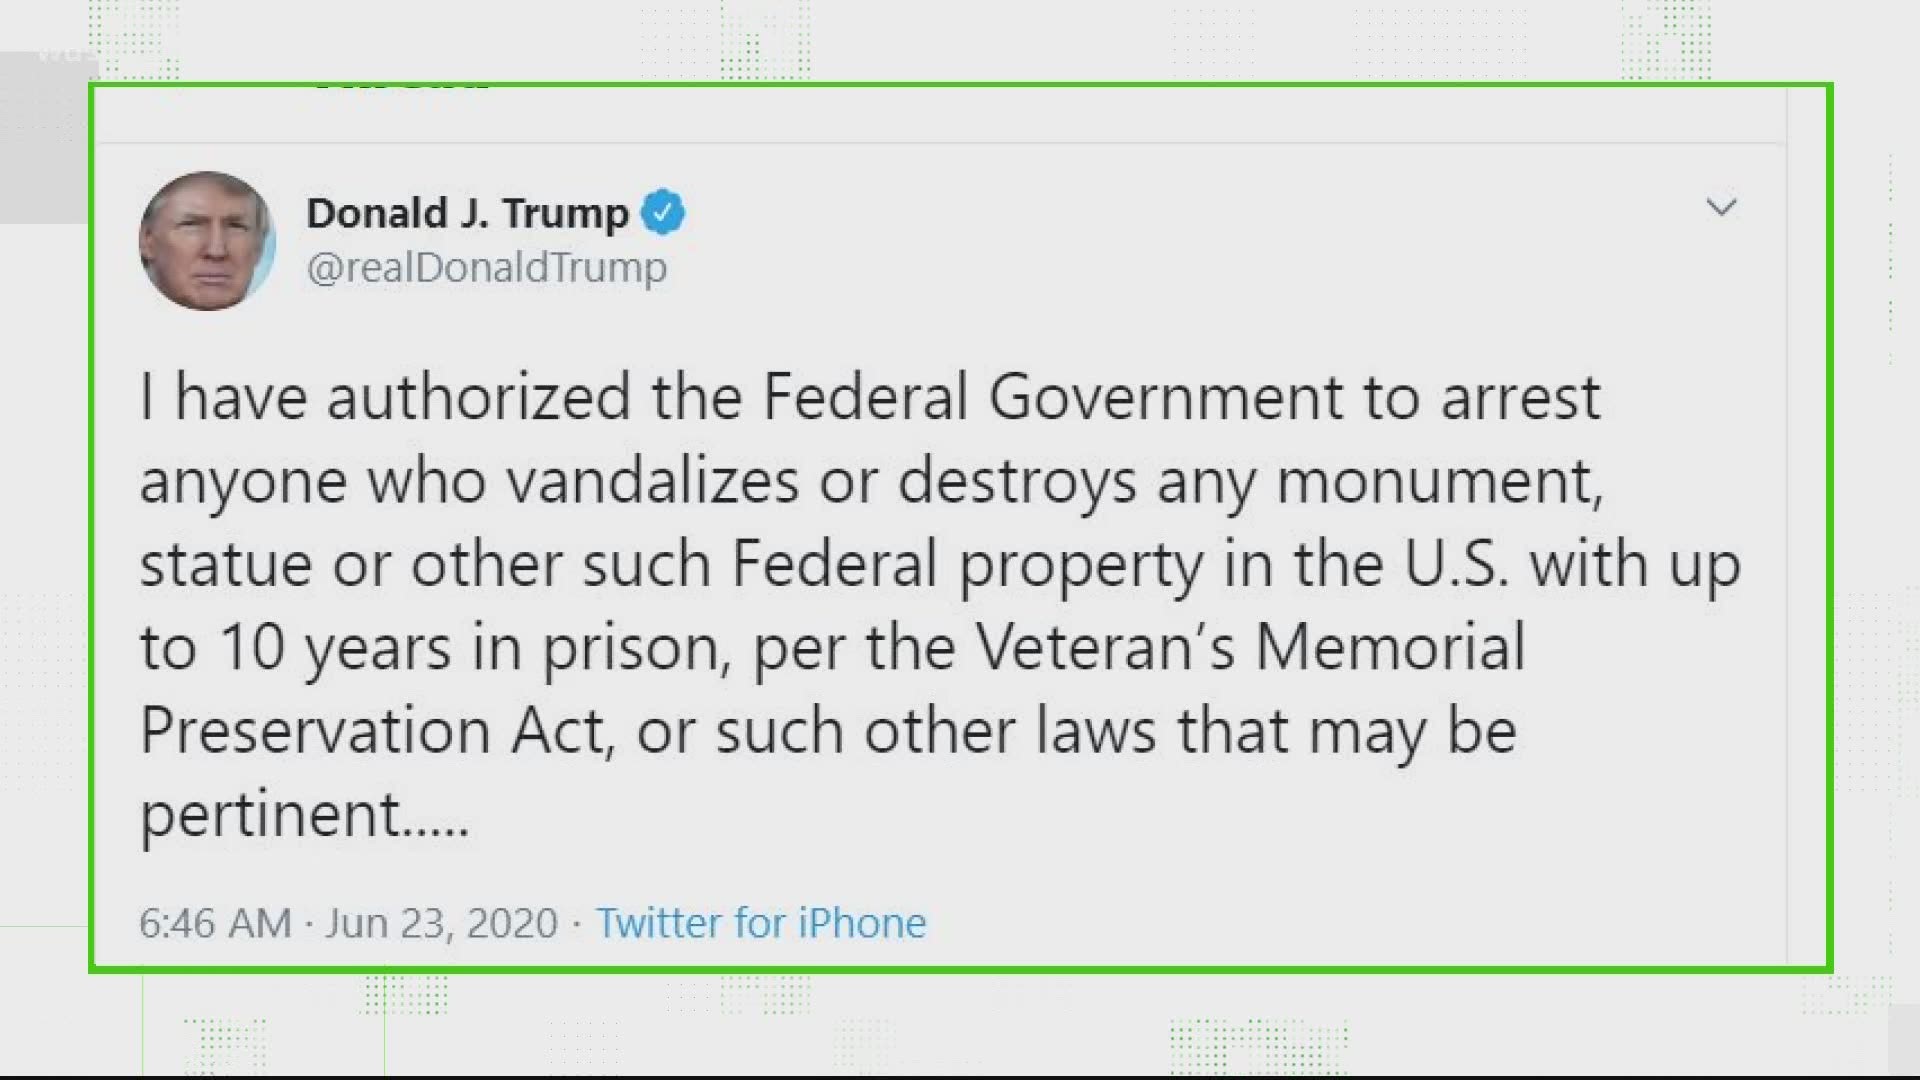 President Trump tweeted about enforcing a law that carries criminal penalties of up to 10 years imprisonment for those who desecrate a veterans' memorial.